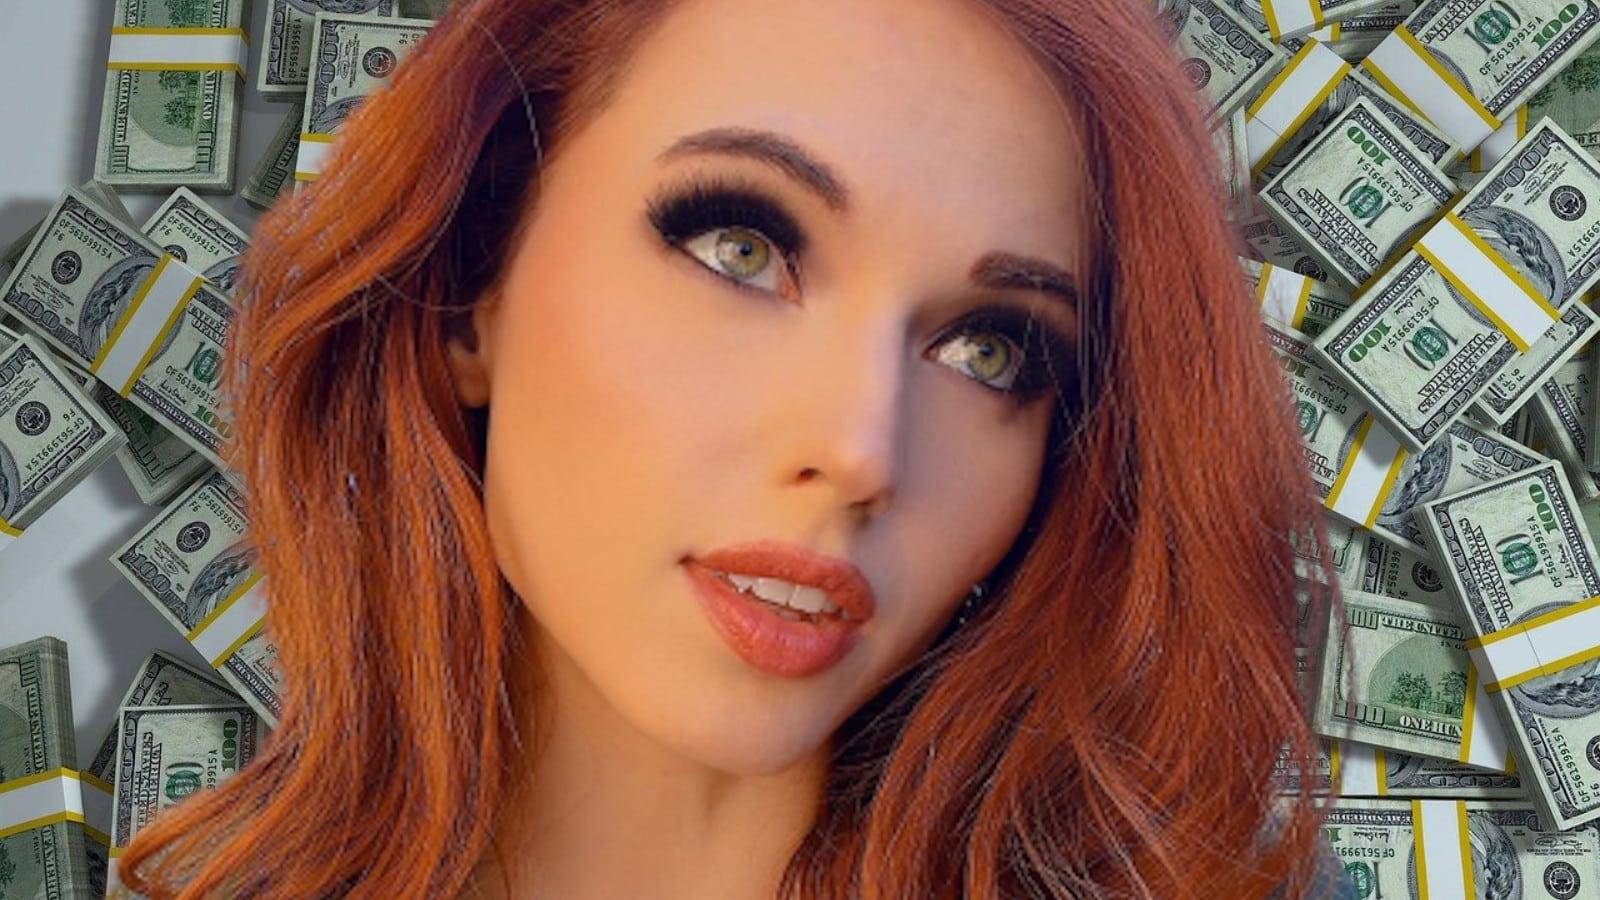 Amouranth onlyfans money revealed